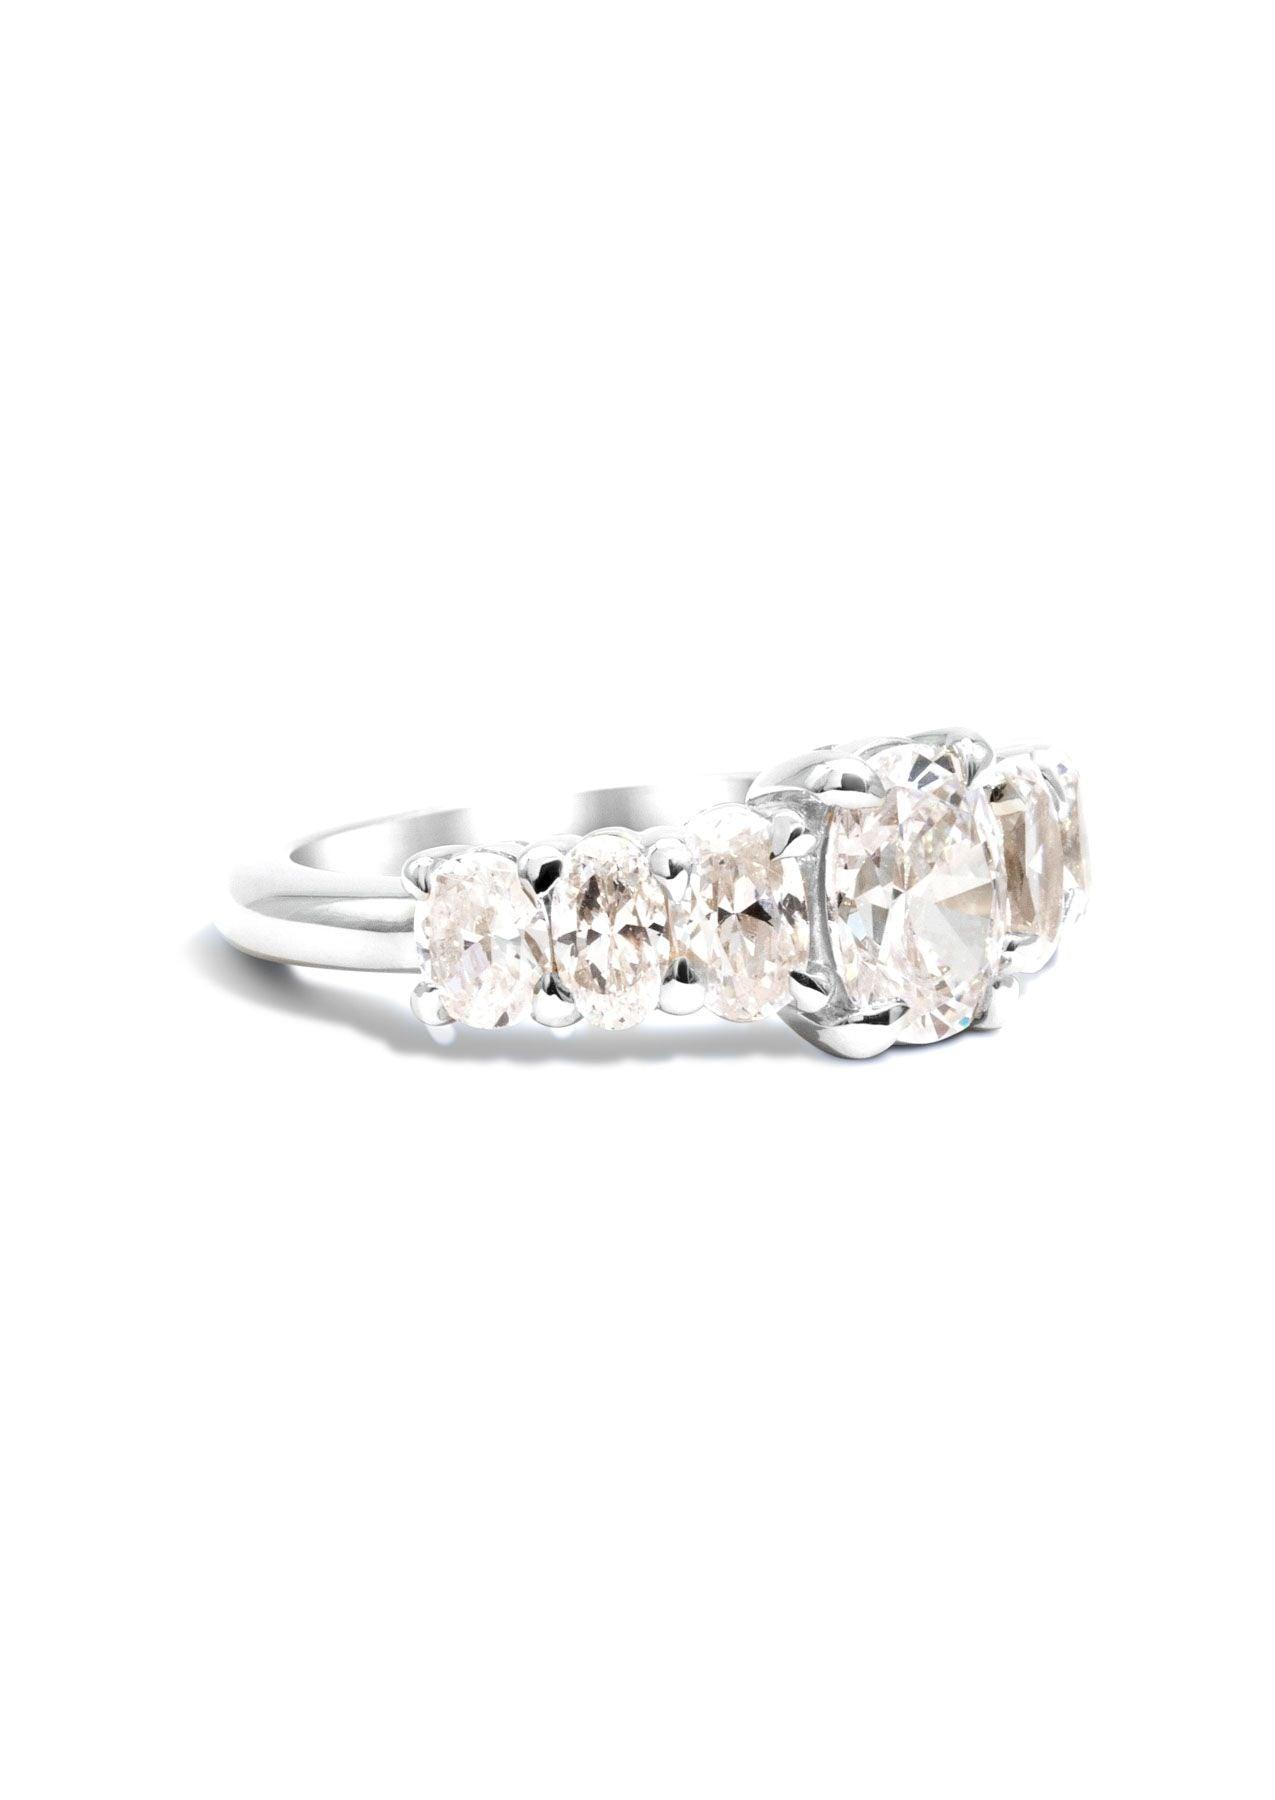 The Oval Banks White Gold Cultured Diamond Ring - Molten Store